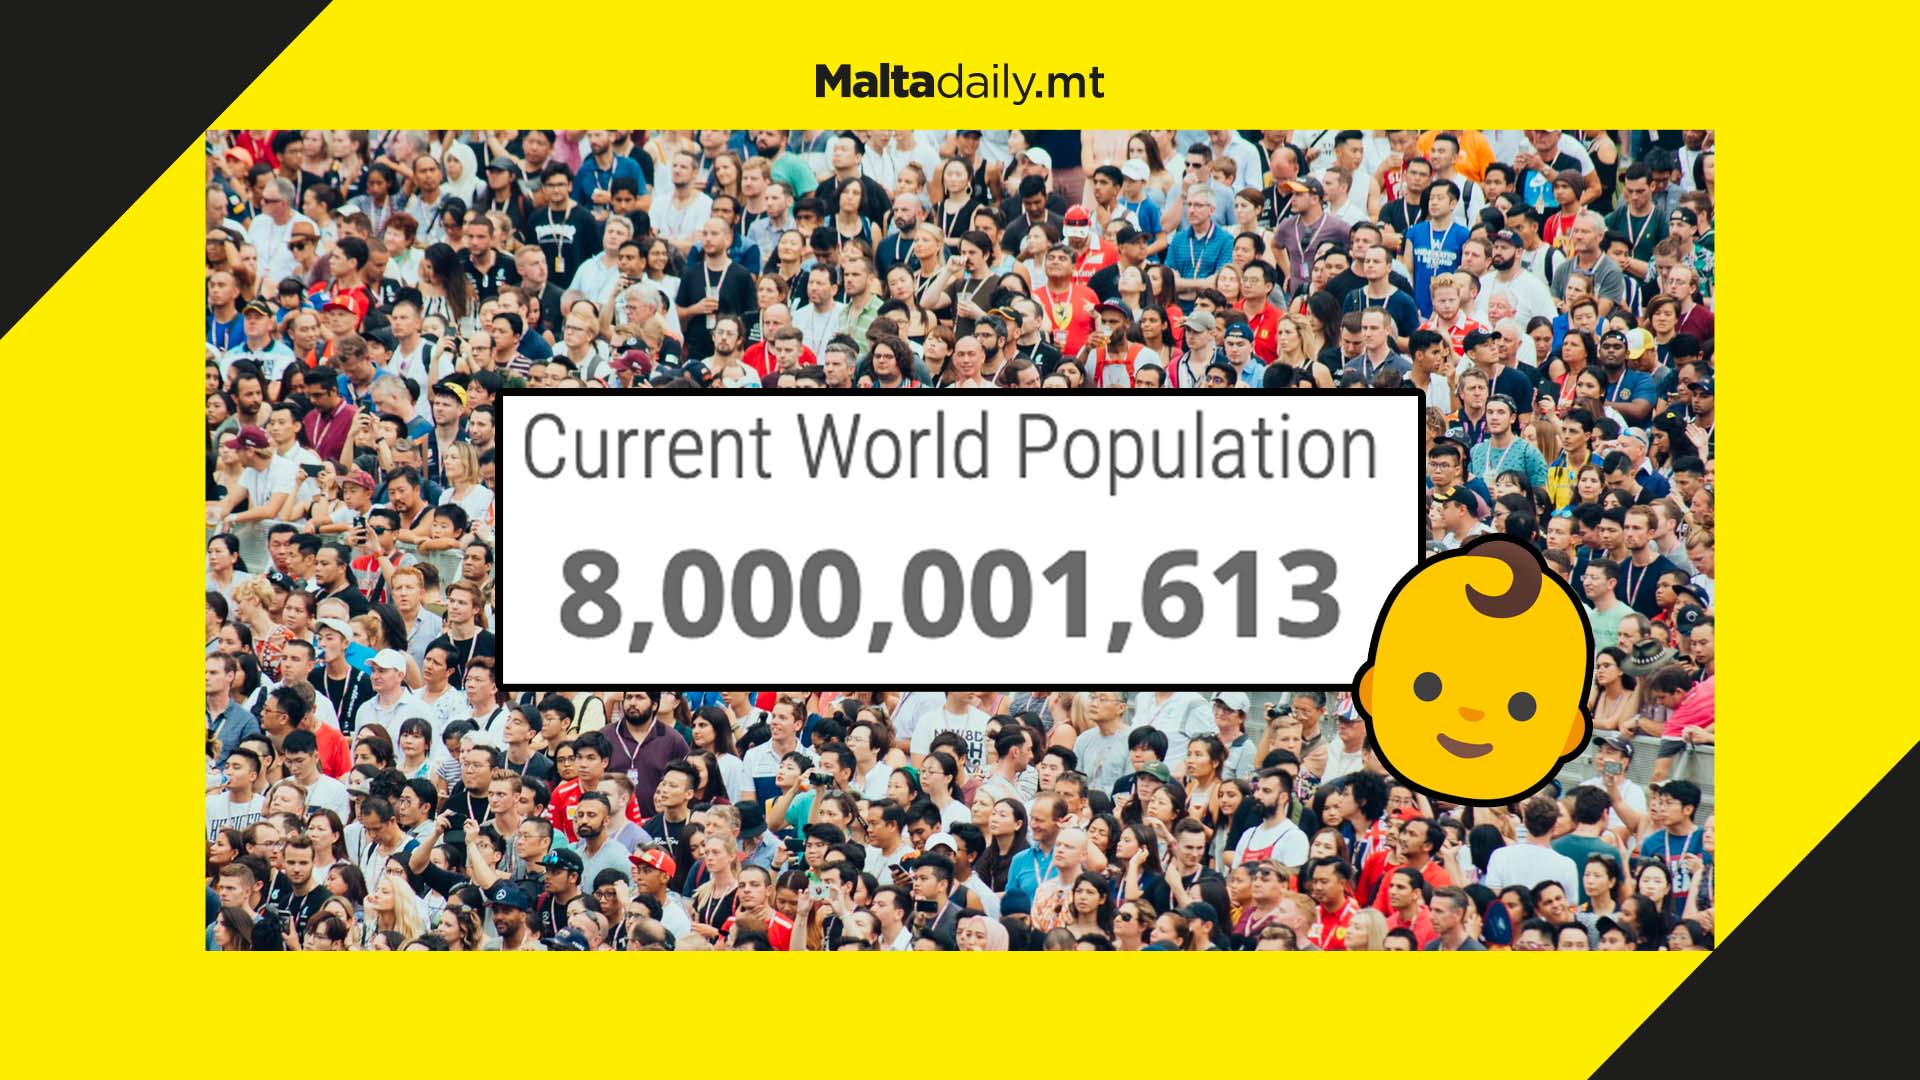 World population officially hit the 8 billion mark today